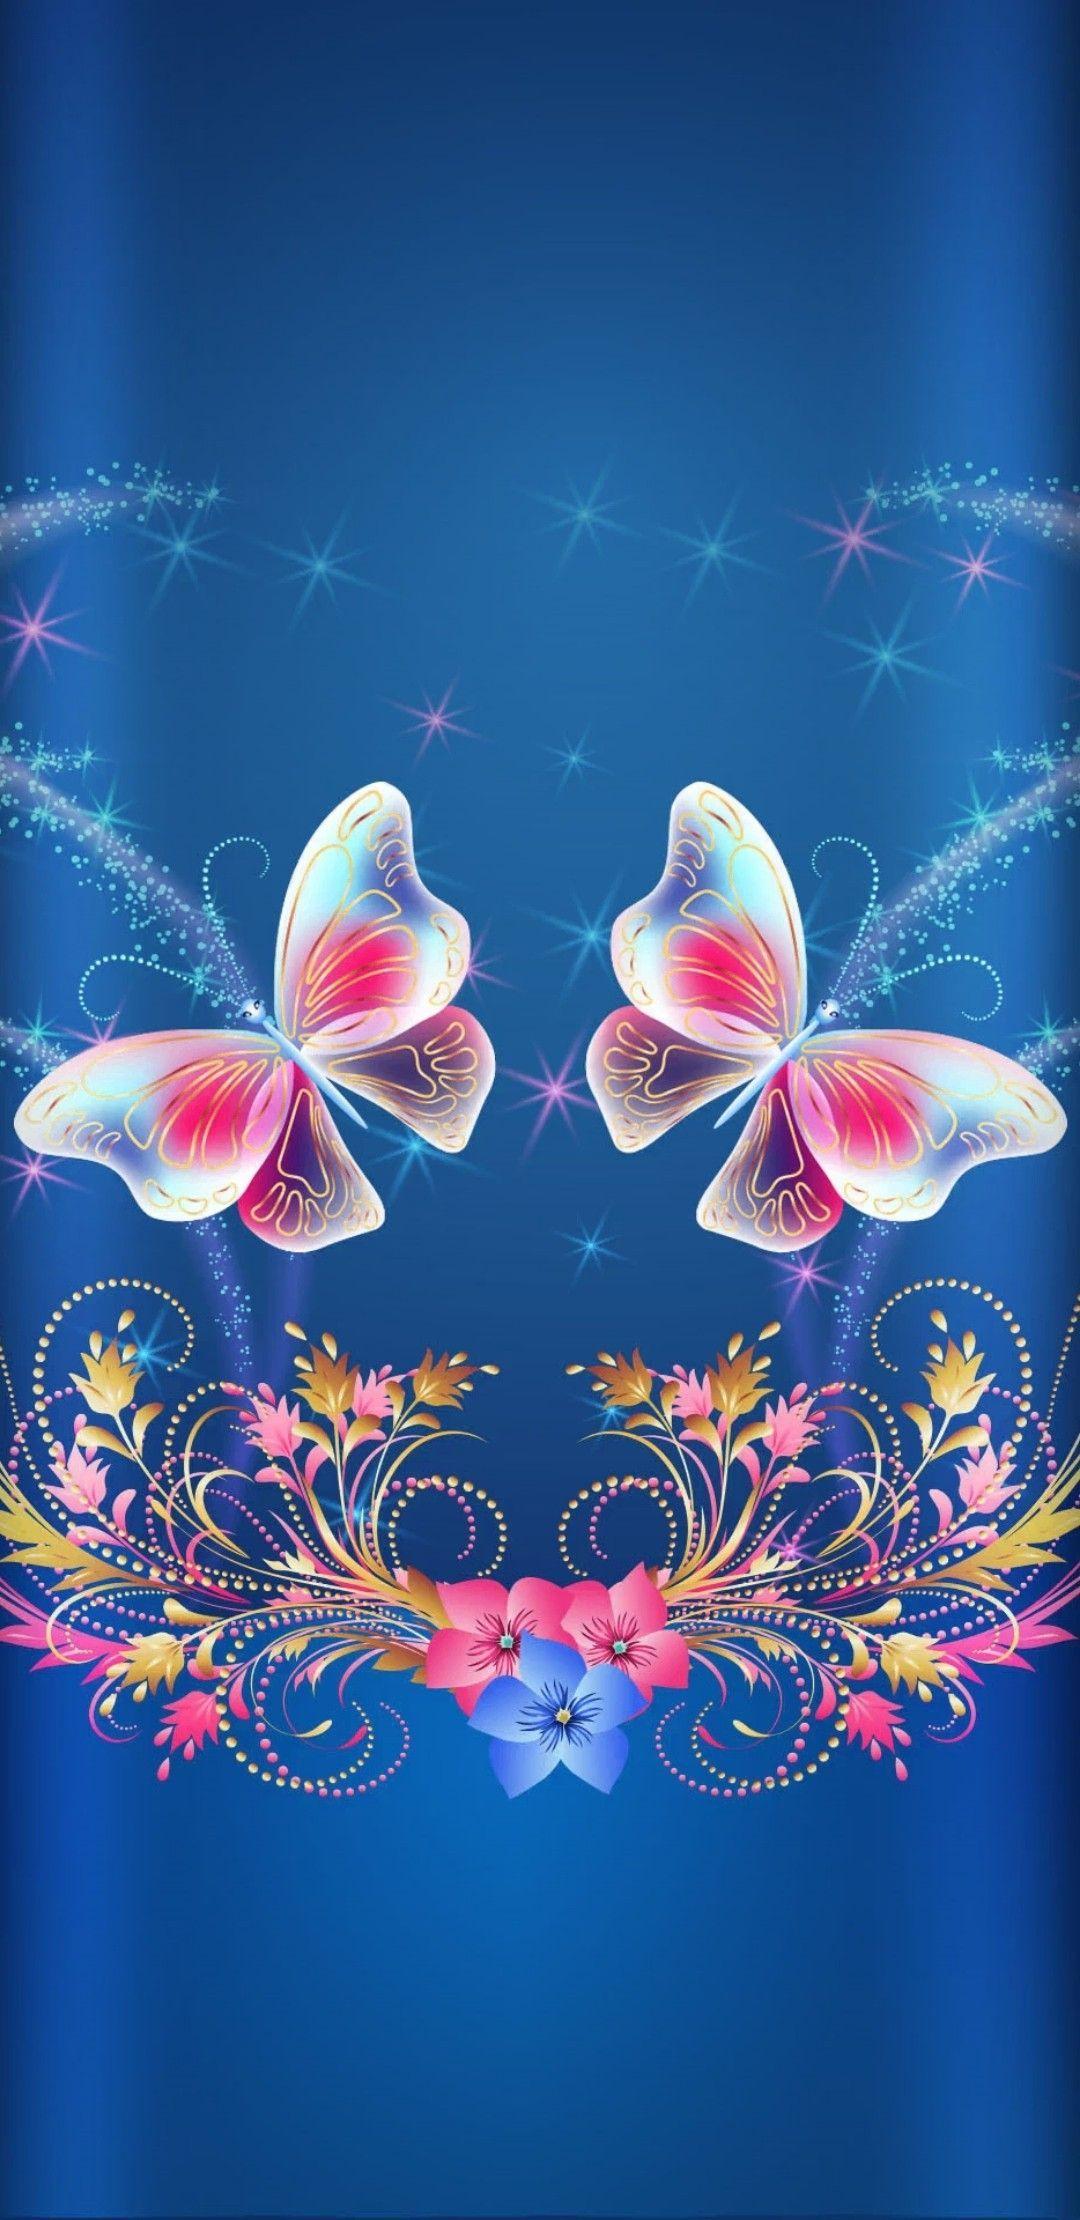 Butterfly Phone Wallpaper Images  Free Photos PNG Stickers Wallpapers   Backgrounds  rawpixel